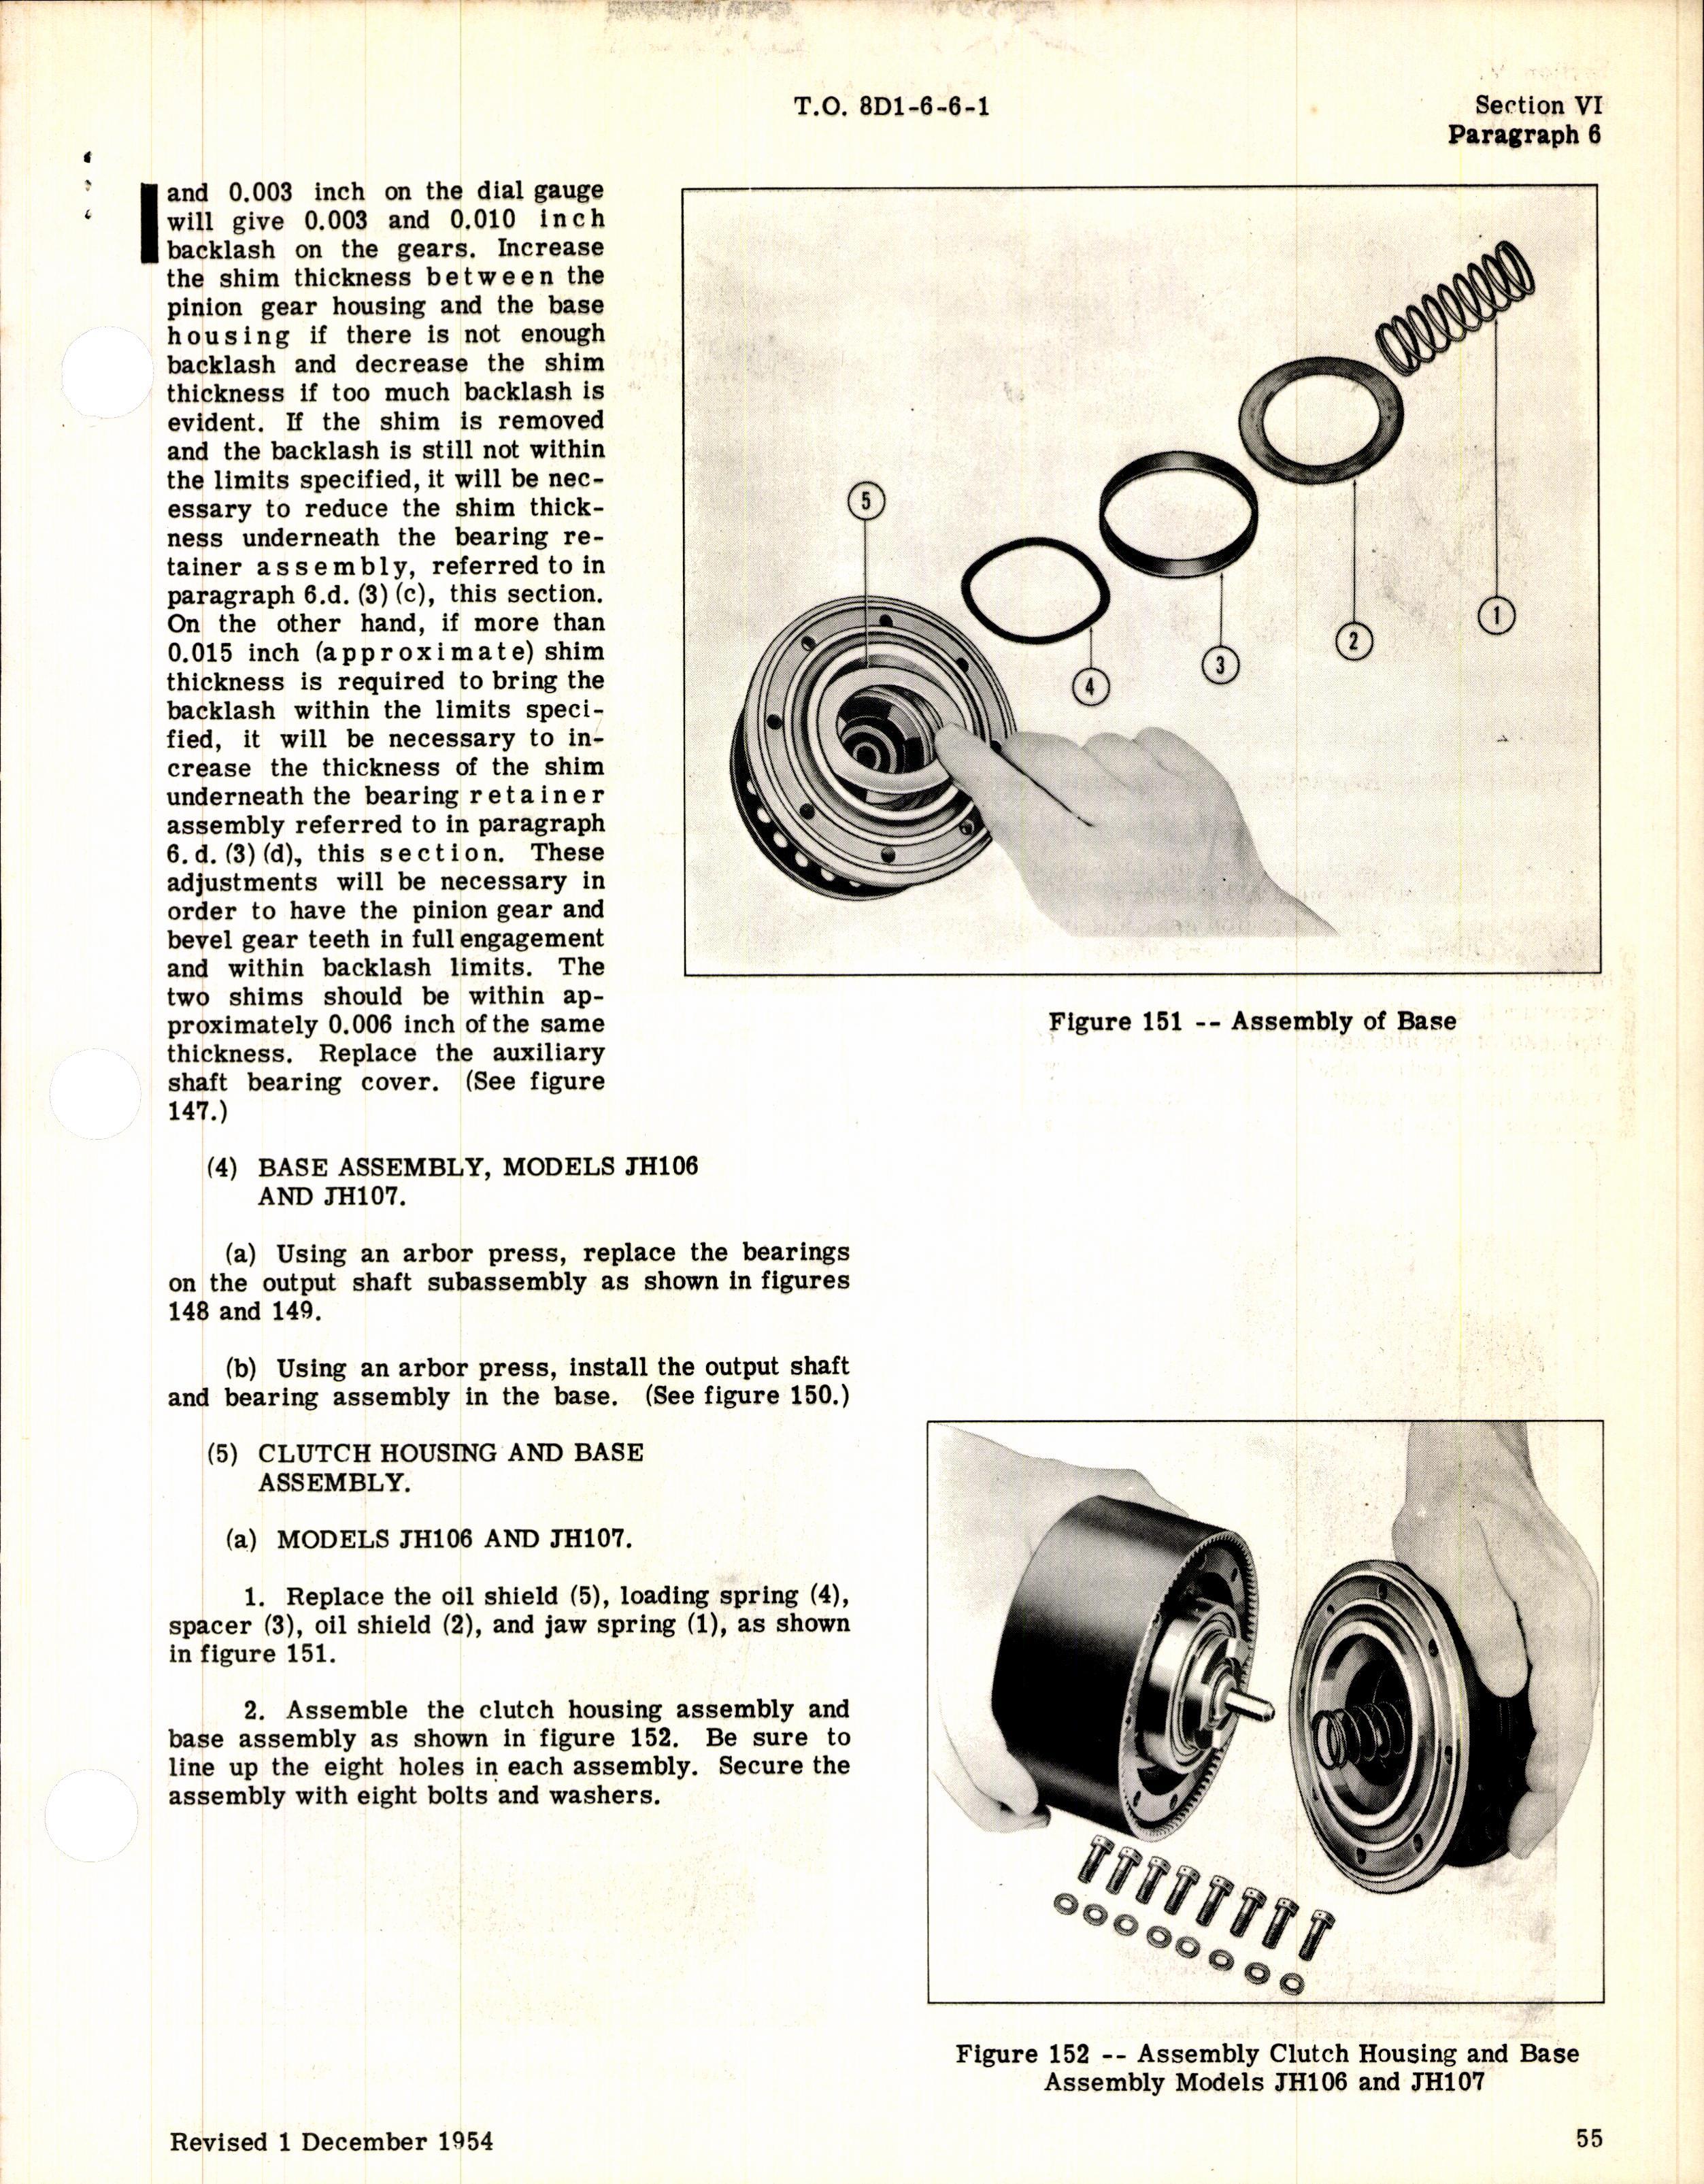 Sample page 5 from AirCorps Library document: Operation, Service, & Overhaul Inst w/ Parts Catalog for Jack & Heintz Retracting Motors